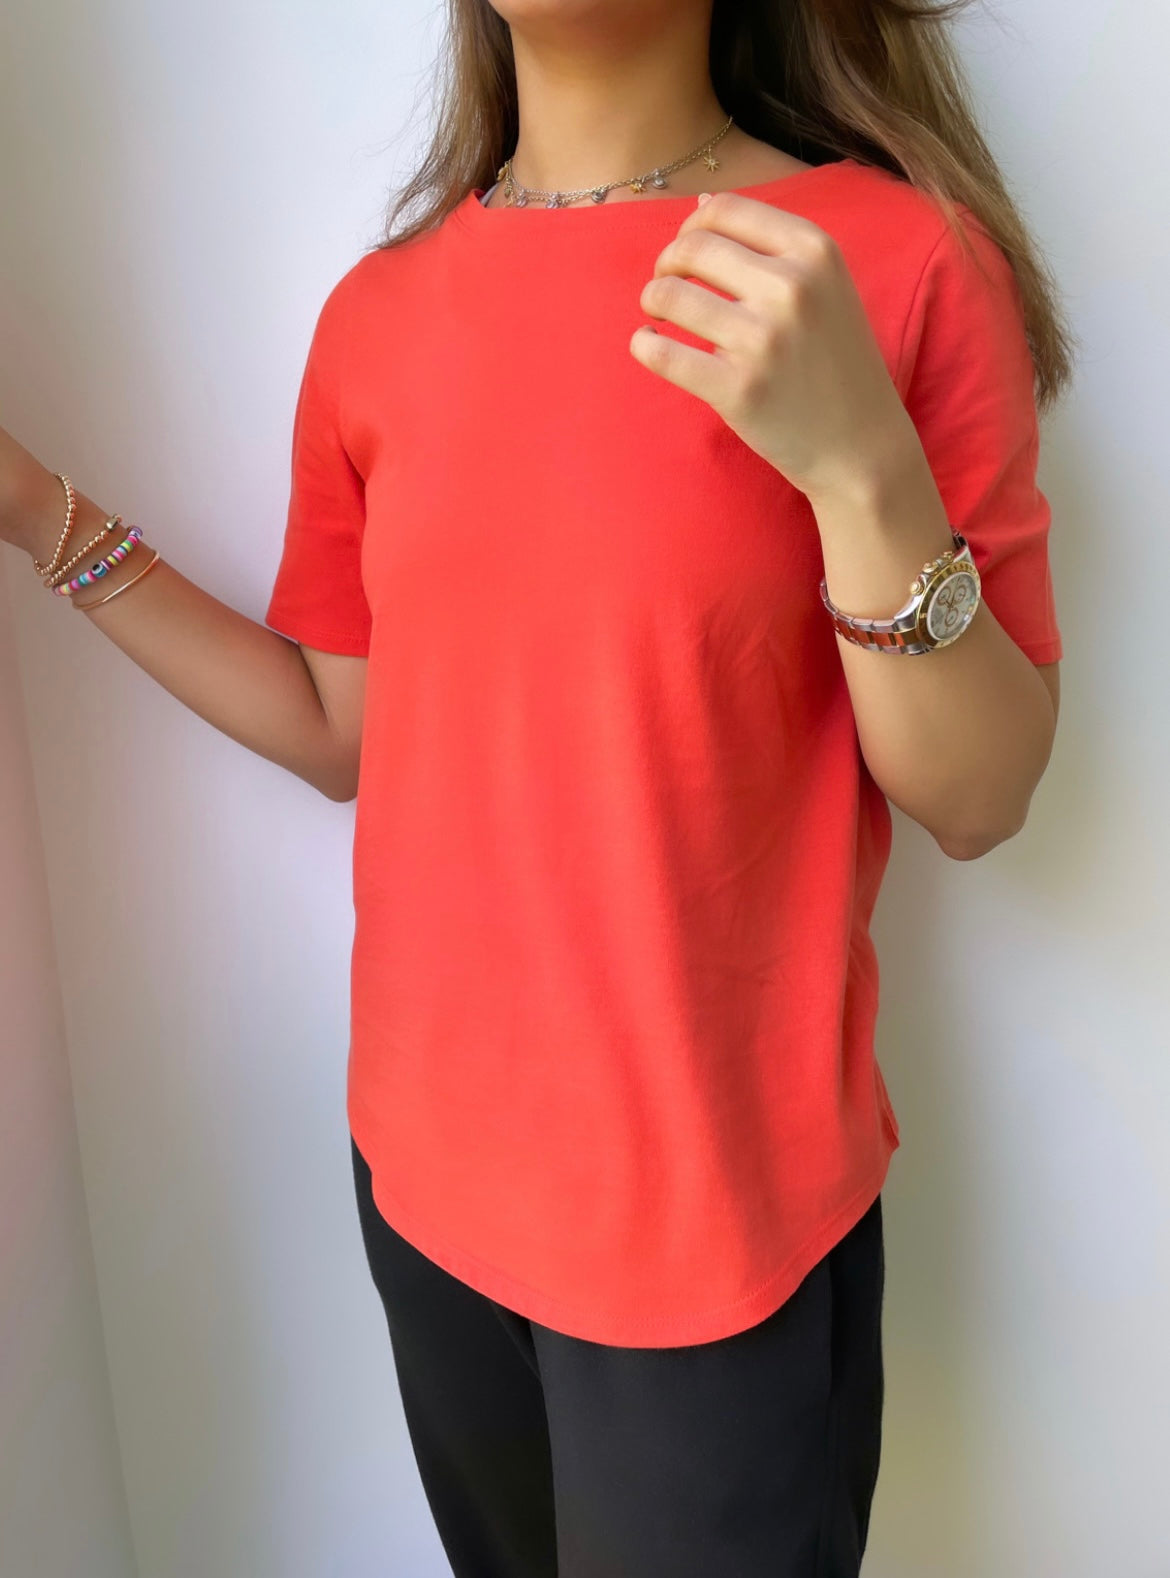 The Essential Tee in Spicy Orange